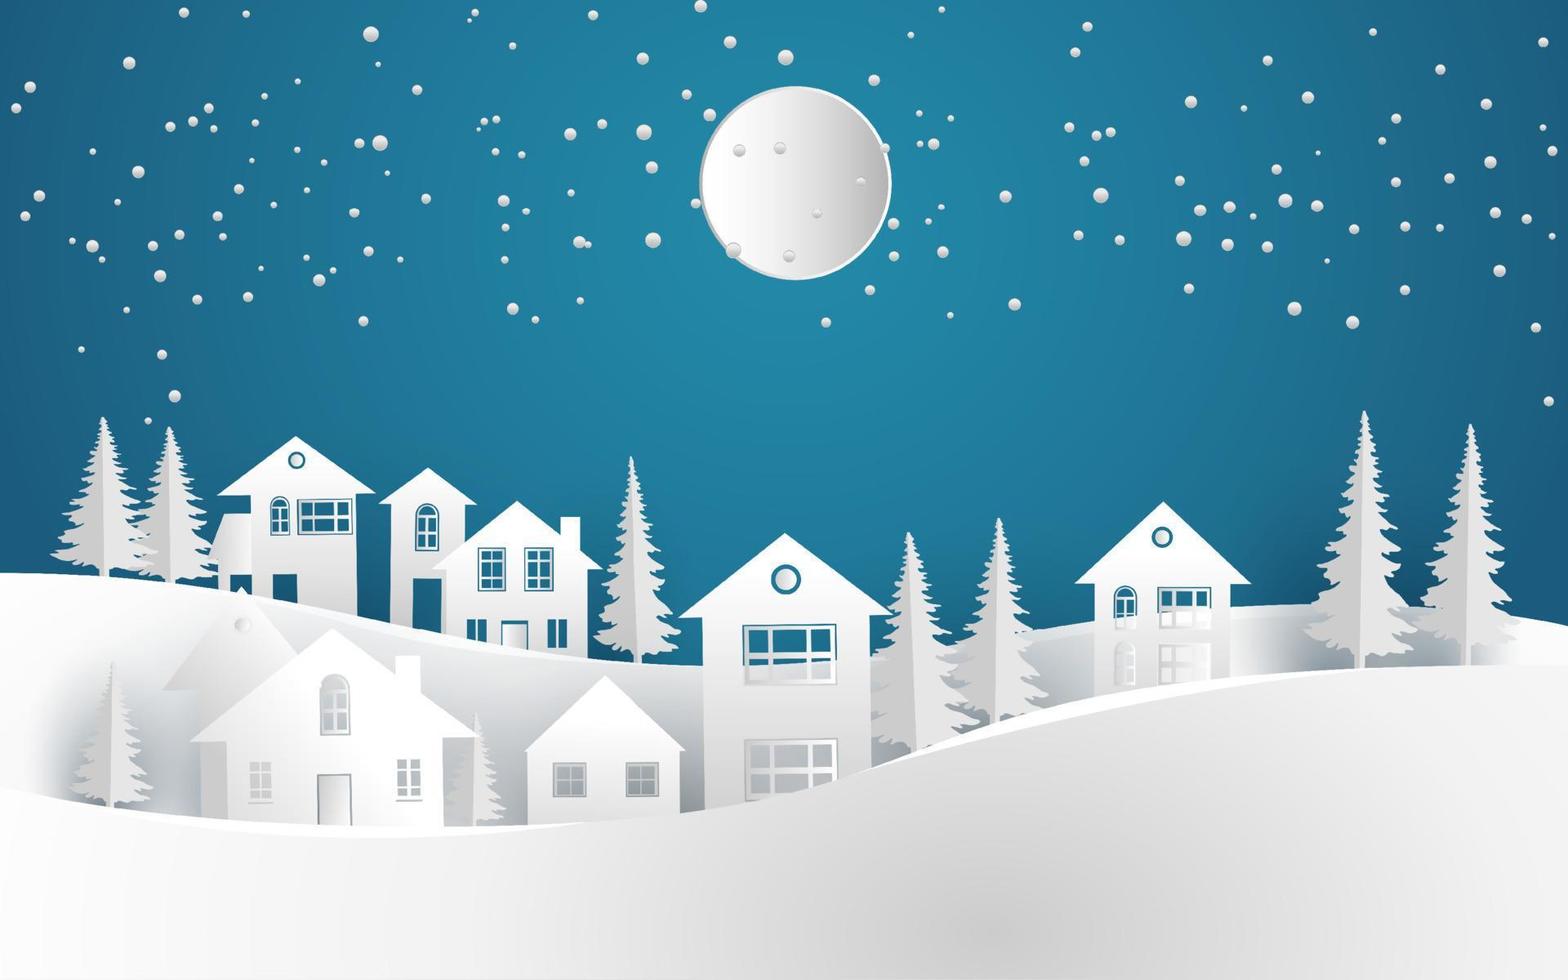 house in winter with paper art design at night vector